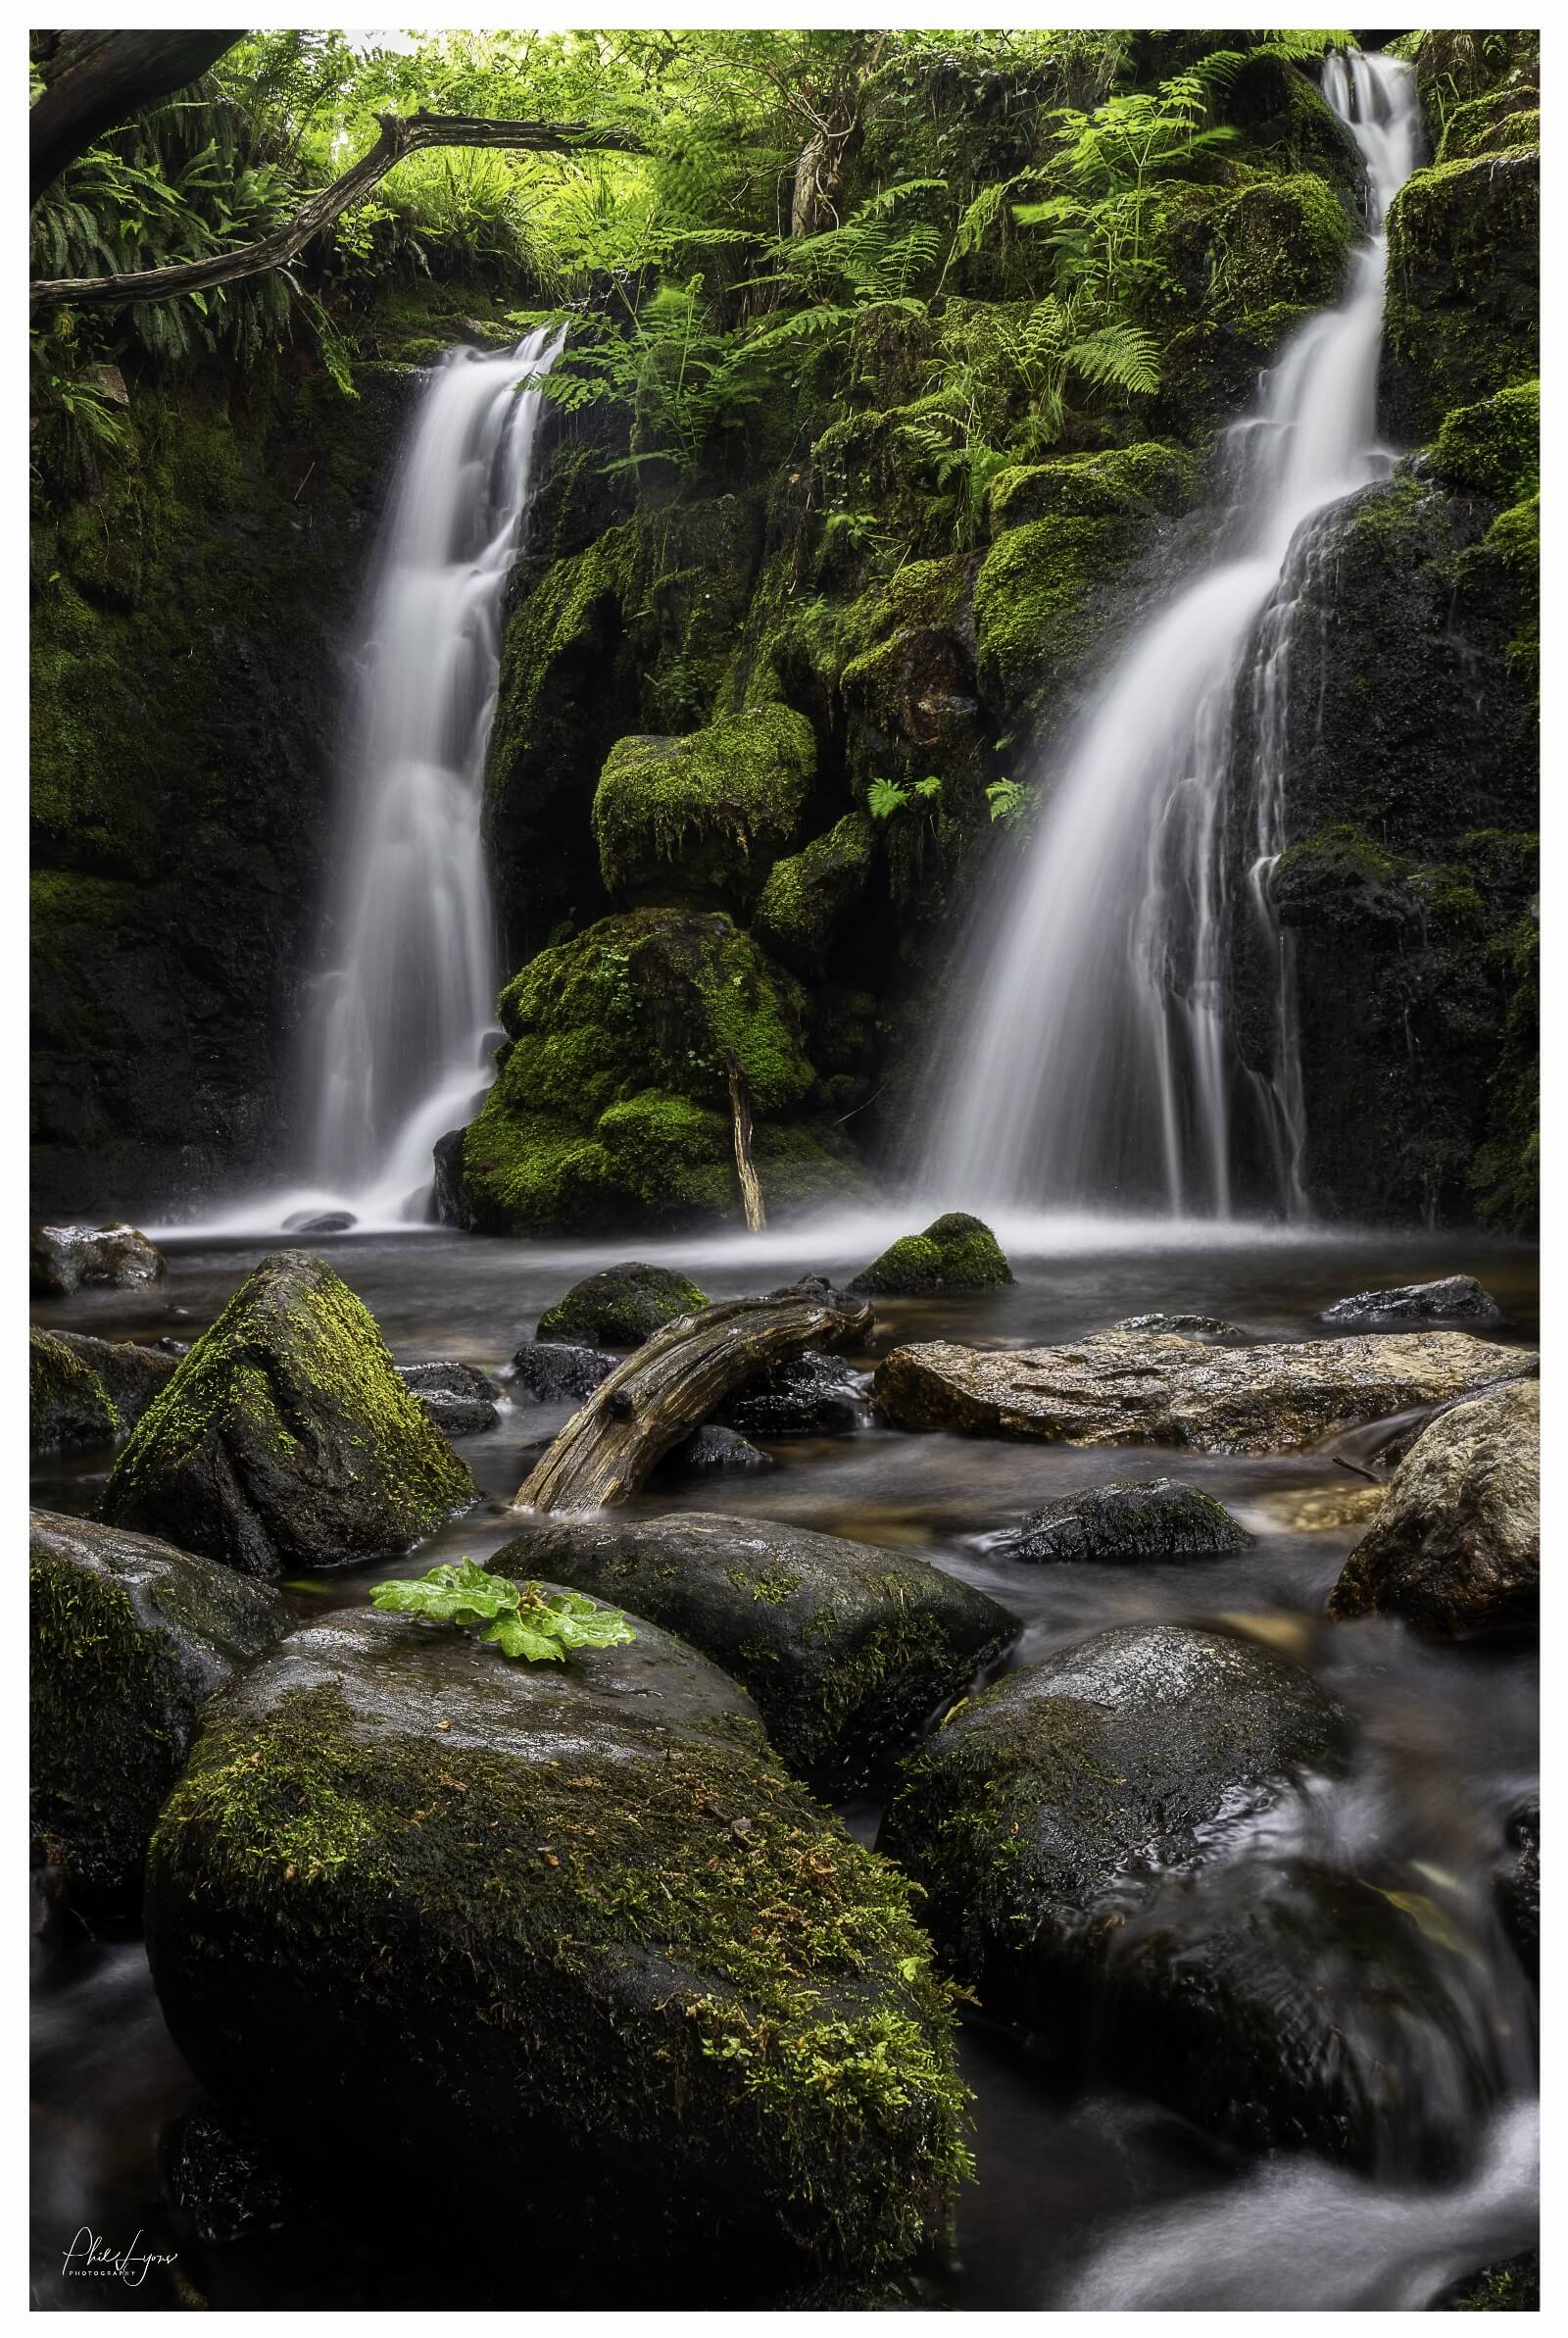 Image of Venford Falls by Phil Lyons